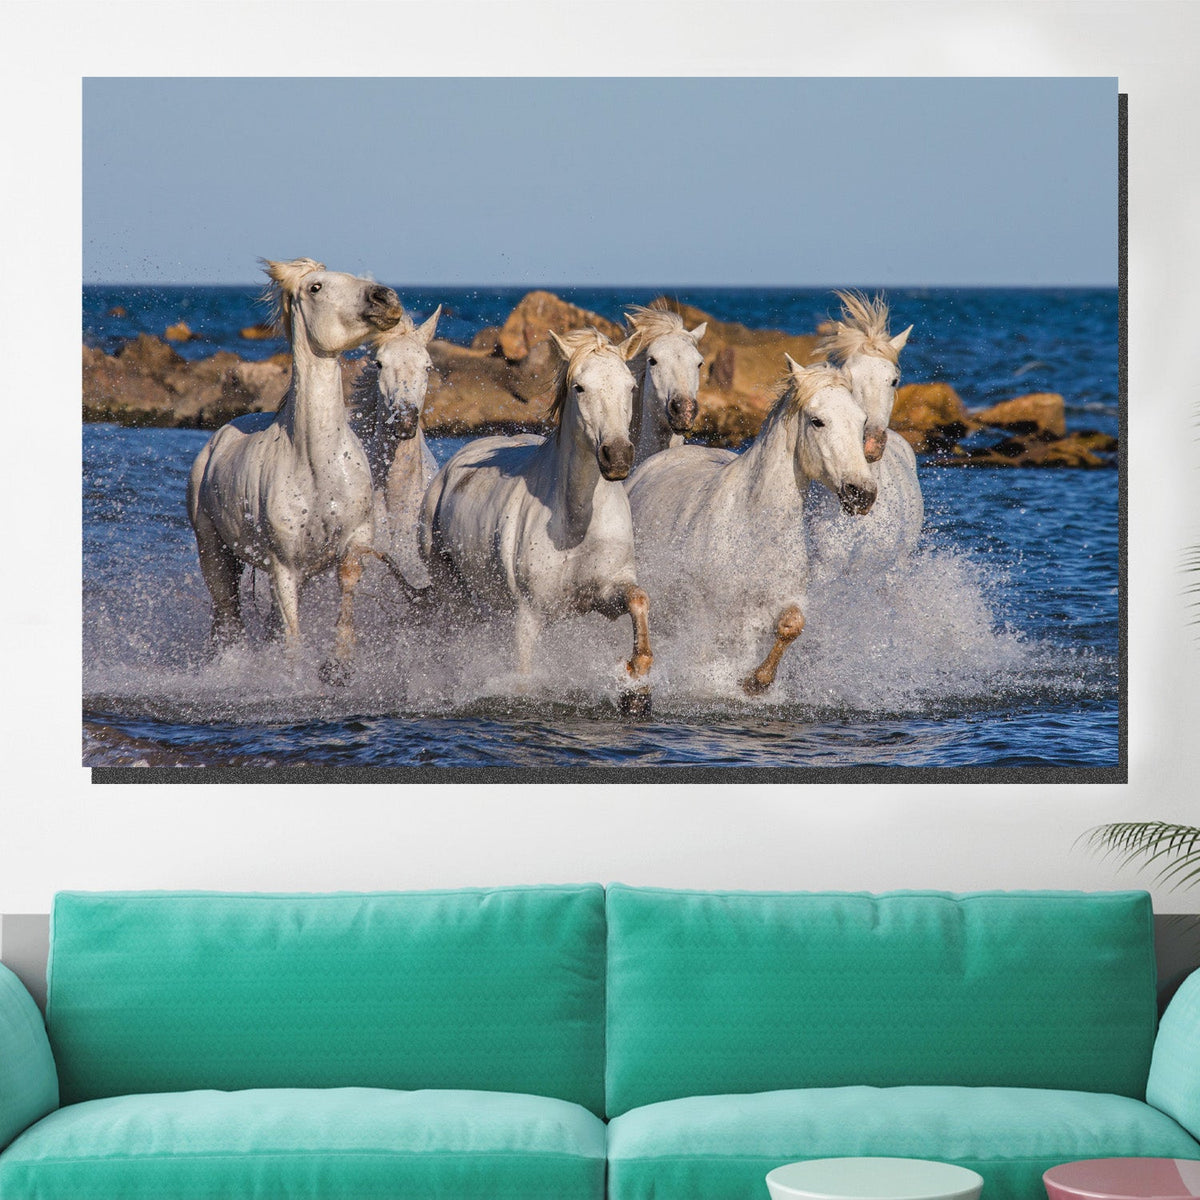 https://cdn.shopify.com/s/files/1/0387/9986/8044/products/WhiteCamargueHorsesCanvasArtprintStretched-2.jpg